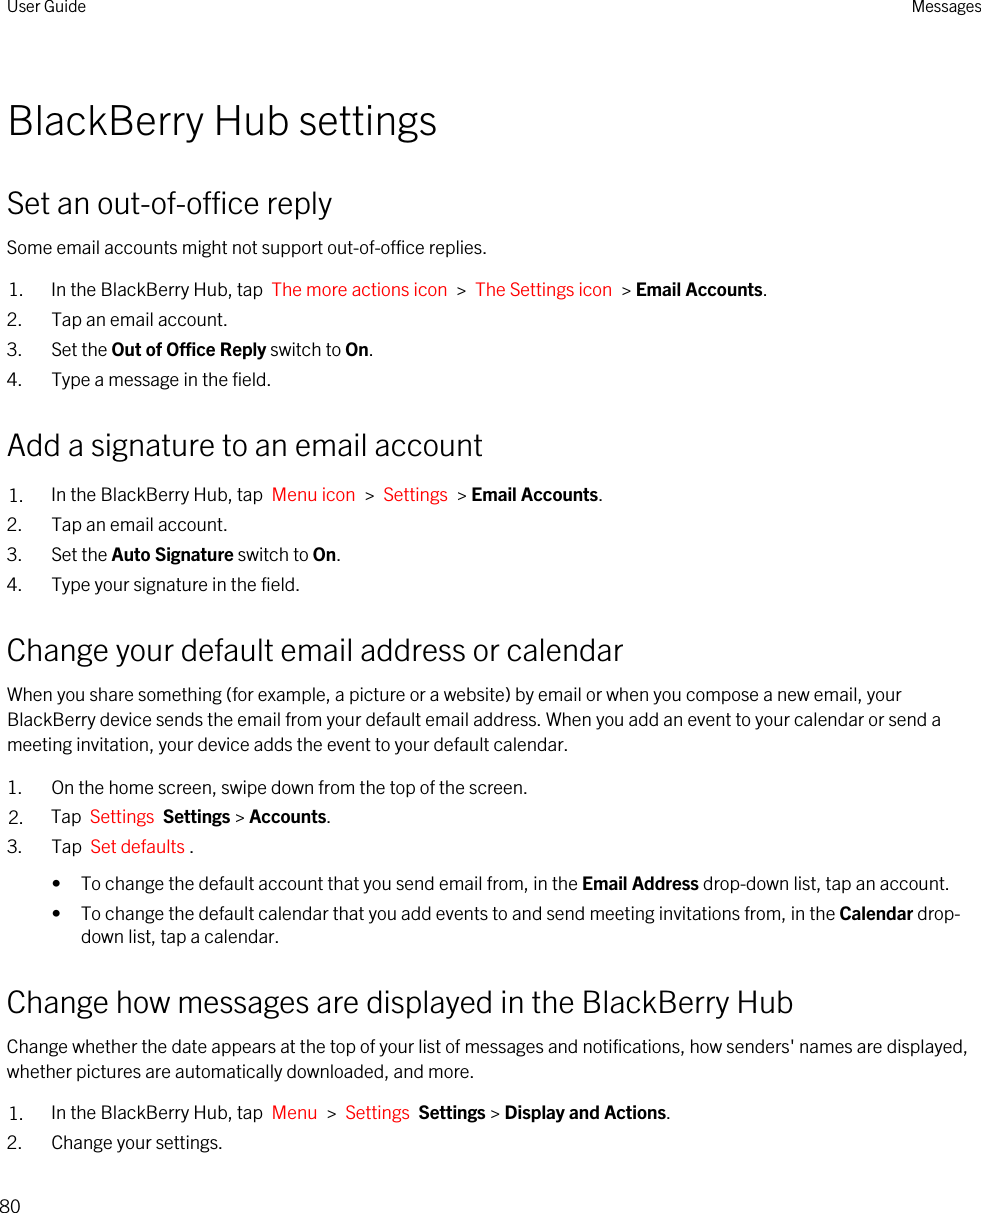 BlackBerry Hub settingsSet an out-of-office replySome email accounts might not support out-of-office replies.1. In the BlackBerry Hub, tap  The more actions icon  &gt;  The Settings icon  &gt; Email Accounts.2. Tap an email account.3. Set the Out of Office Reply switch to On.4. Type a message in the field.Add a signature to an email account1. In the BlackBerry Hub, tap  Menu icon  &gt;  Settings  &gt; Email Accounts.2. Tap an email account.3. Set the Auto Signature switch to On.4. Type your signature in the field.Change your default email address or calendarWhen you share something (for example, a picture or a website) by email or when you compose a new email, your BlackBerry device sends the email from your default email address. When you add an event to your calendar or send a meeting invitation, your device adds the event to your default calendar.1. On the home screen, swipe down from the top of the screen.2. Tap  Settings  Settings &gt; Accounts.3. Tap  Set defaults .• To change the default account that you send email from, in the Email Address drop-down list, tap an account.• To change the default calendar that you add events to and send meeting invitations from, in the Calendar drop-down list, tap a calendar.Change how messages are displayed in the BlackBerry HubChange whether the date appears at the top of your list of messages and notifications, how senders&apos; names are displayed, whether pictures are automatically downloaded, and more.1. In the BlackBerry Hub, tap  Menu  &gt;  Settings  Settings &gt; Display and Actions.2. Change your settings.User Guide Messages80